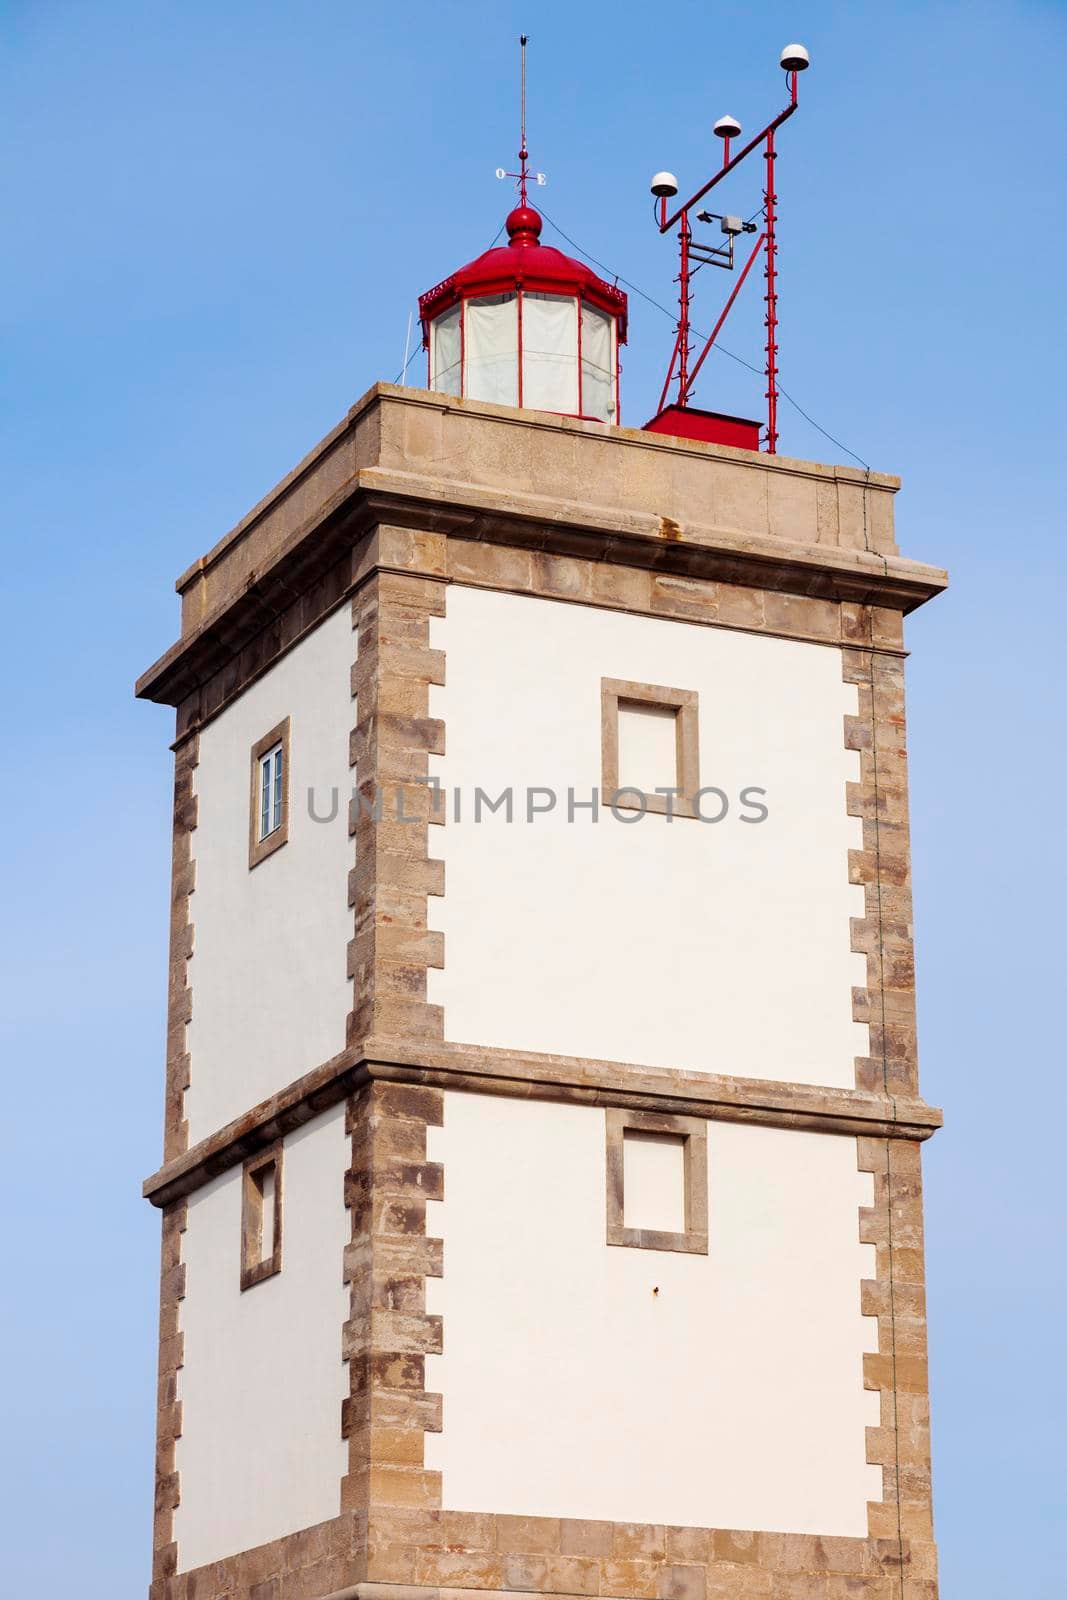 Cabo Carvoeiro Lighthouse in Portugal. Centro Region, Portugal.